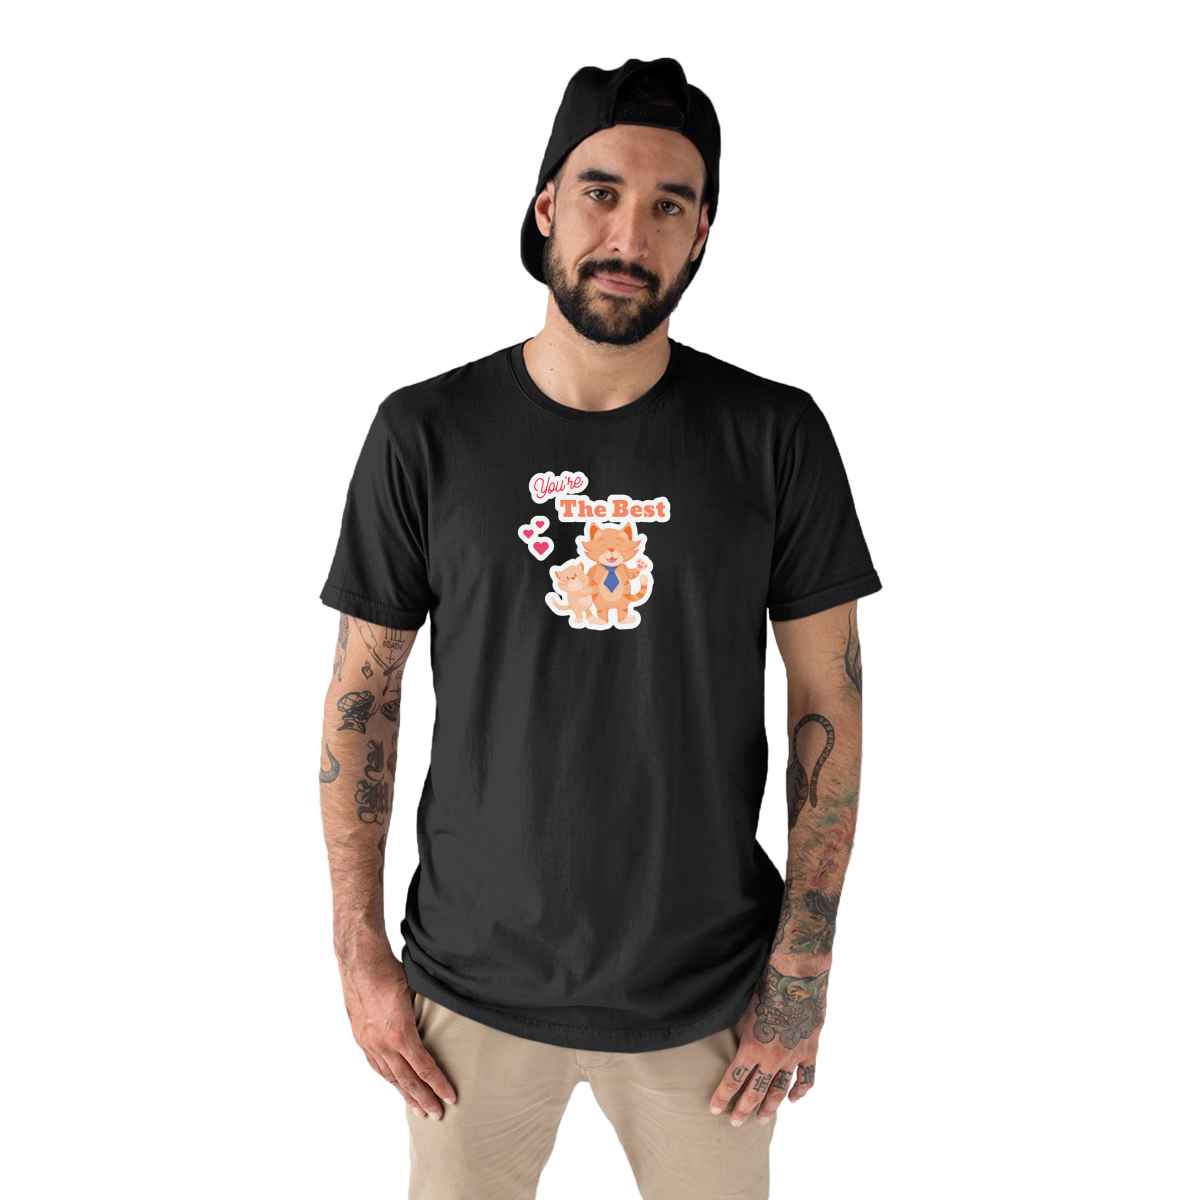 You are the Best Men's T-shirt | Black